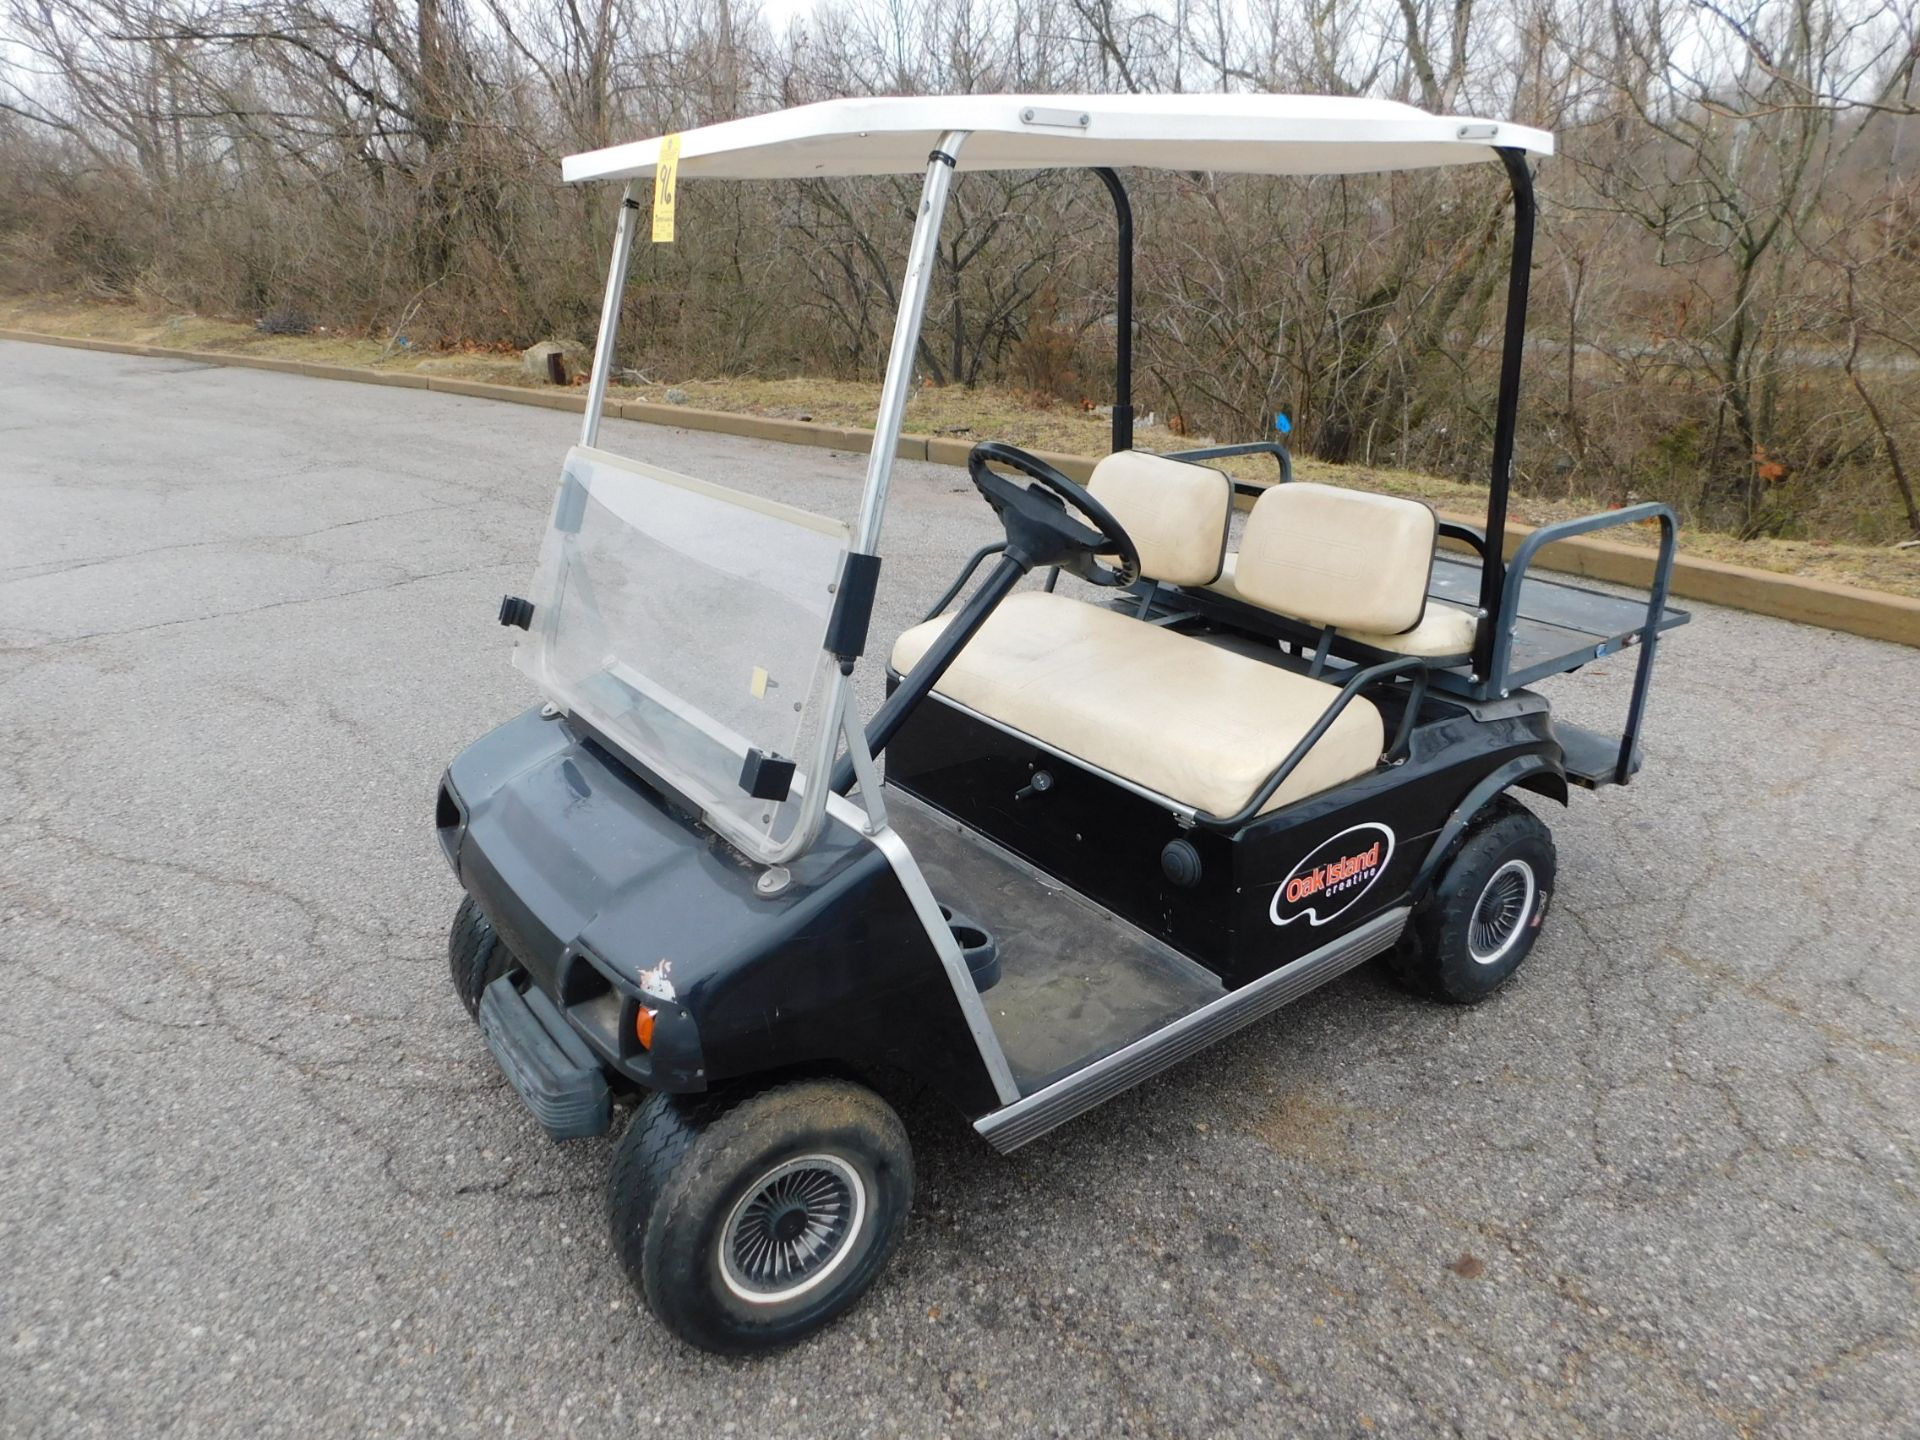 Club Car Gas-Powered Golf Cart, SN AG9924-769798, Canopy, Windshield, Fold-Out Back Bed